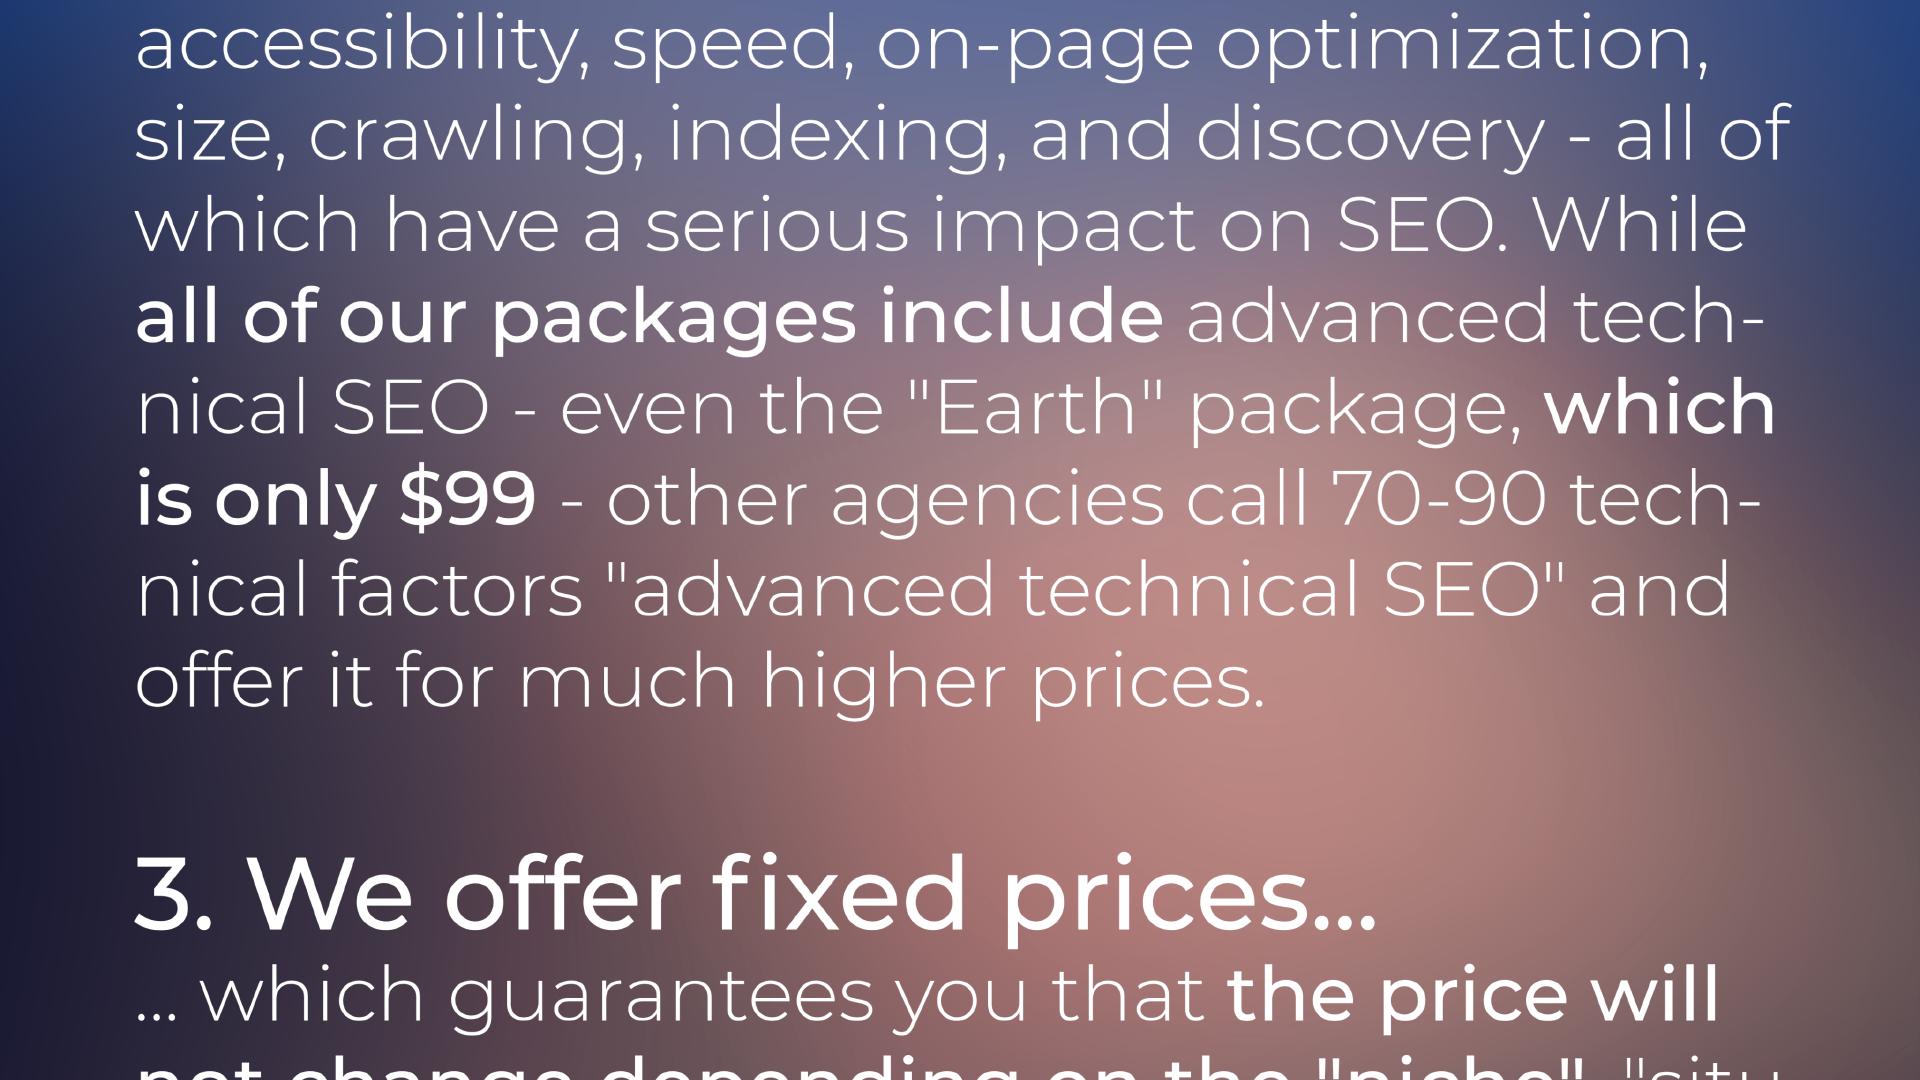 ... accessibility, speed, on-page optimization, size, crawling, indexing, and discovery - all of which have a serious impact on SEO. While all of our packages include advanced technical SEO - even the 'Earth' package, which is only $99 - other agencies call 70-90 technical factors 'advanced technical SEO' and offer it for much higher prices. 3. We offer fixed prices which guarantees you that the price will not ...